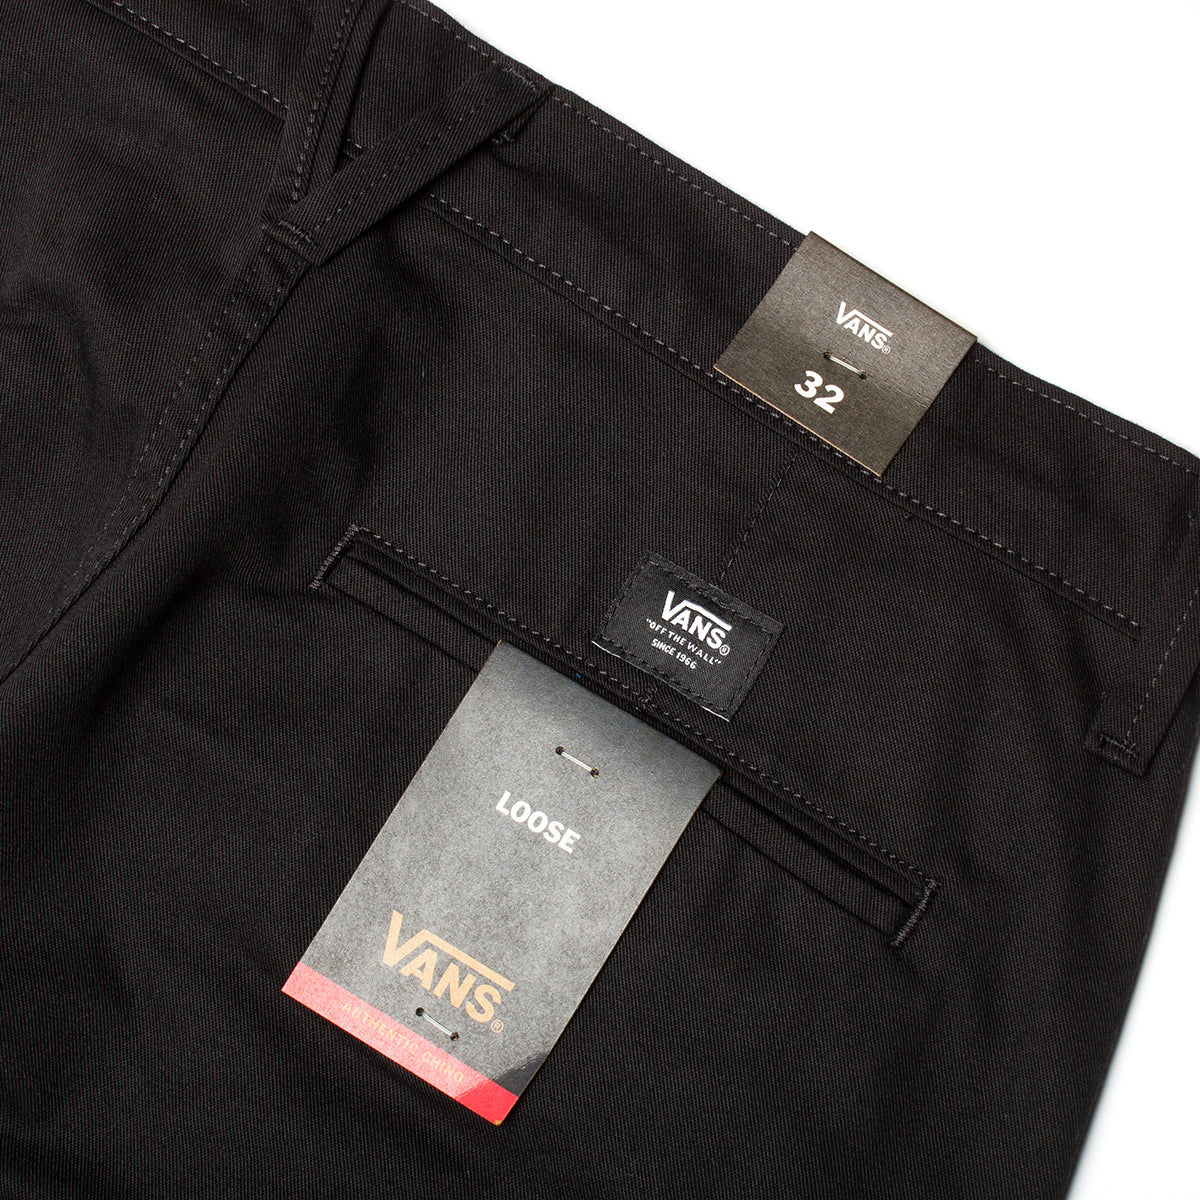 Vans Authentic Chino Loose Pant